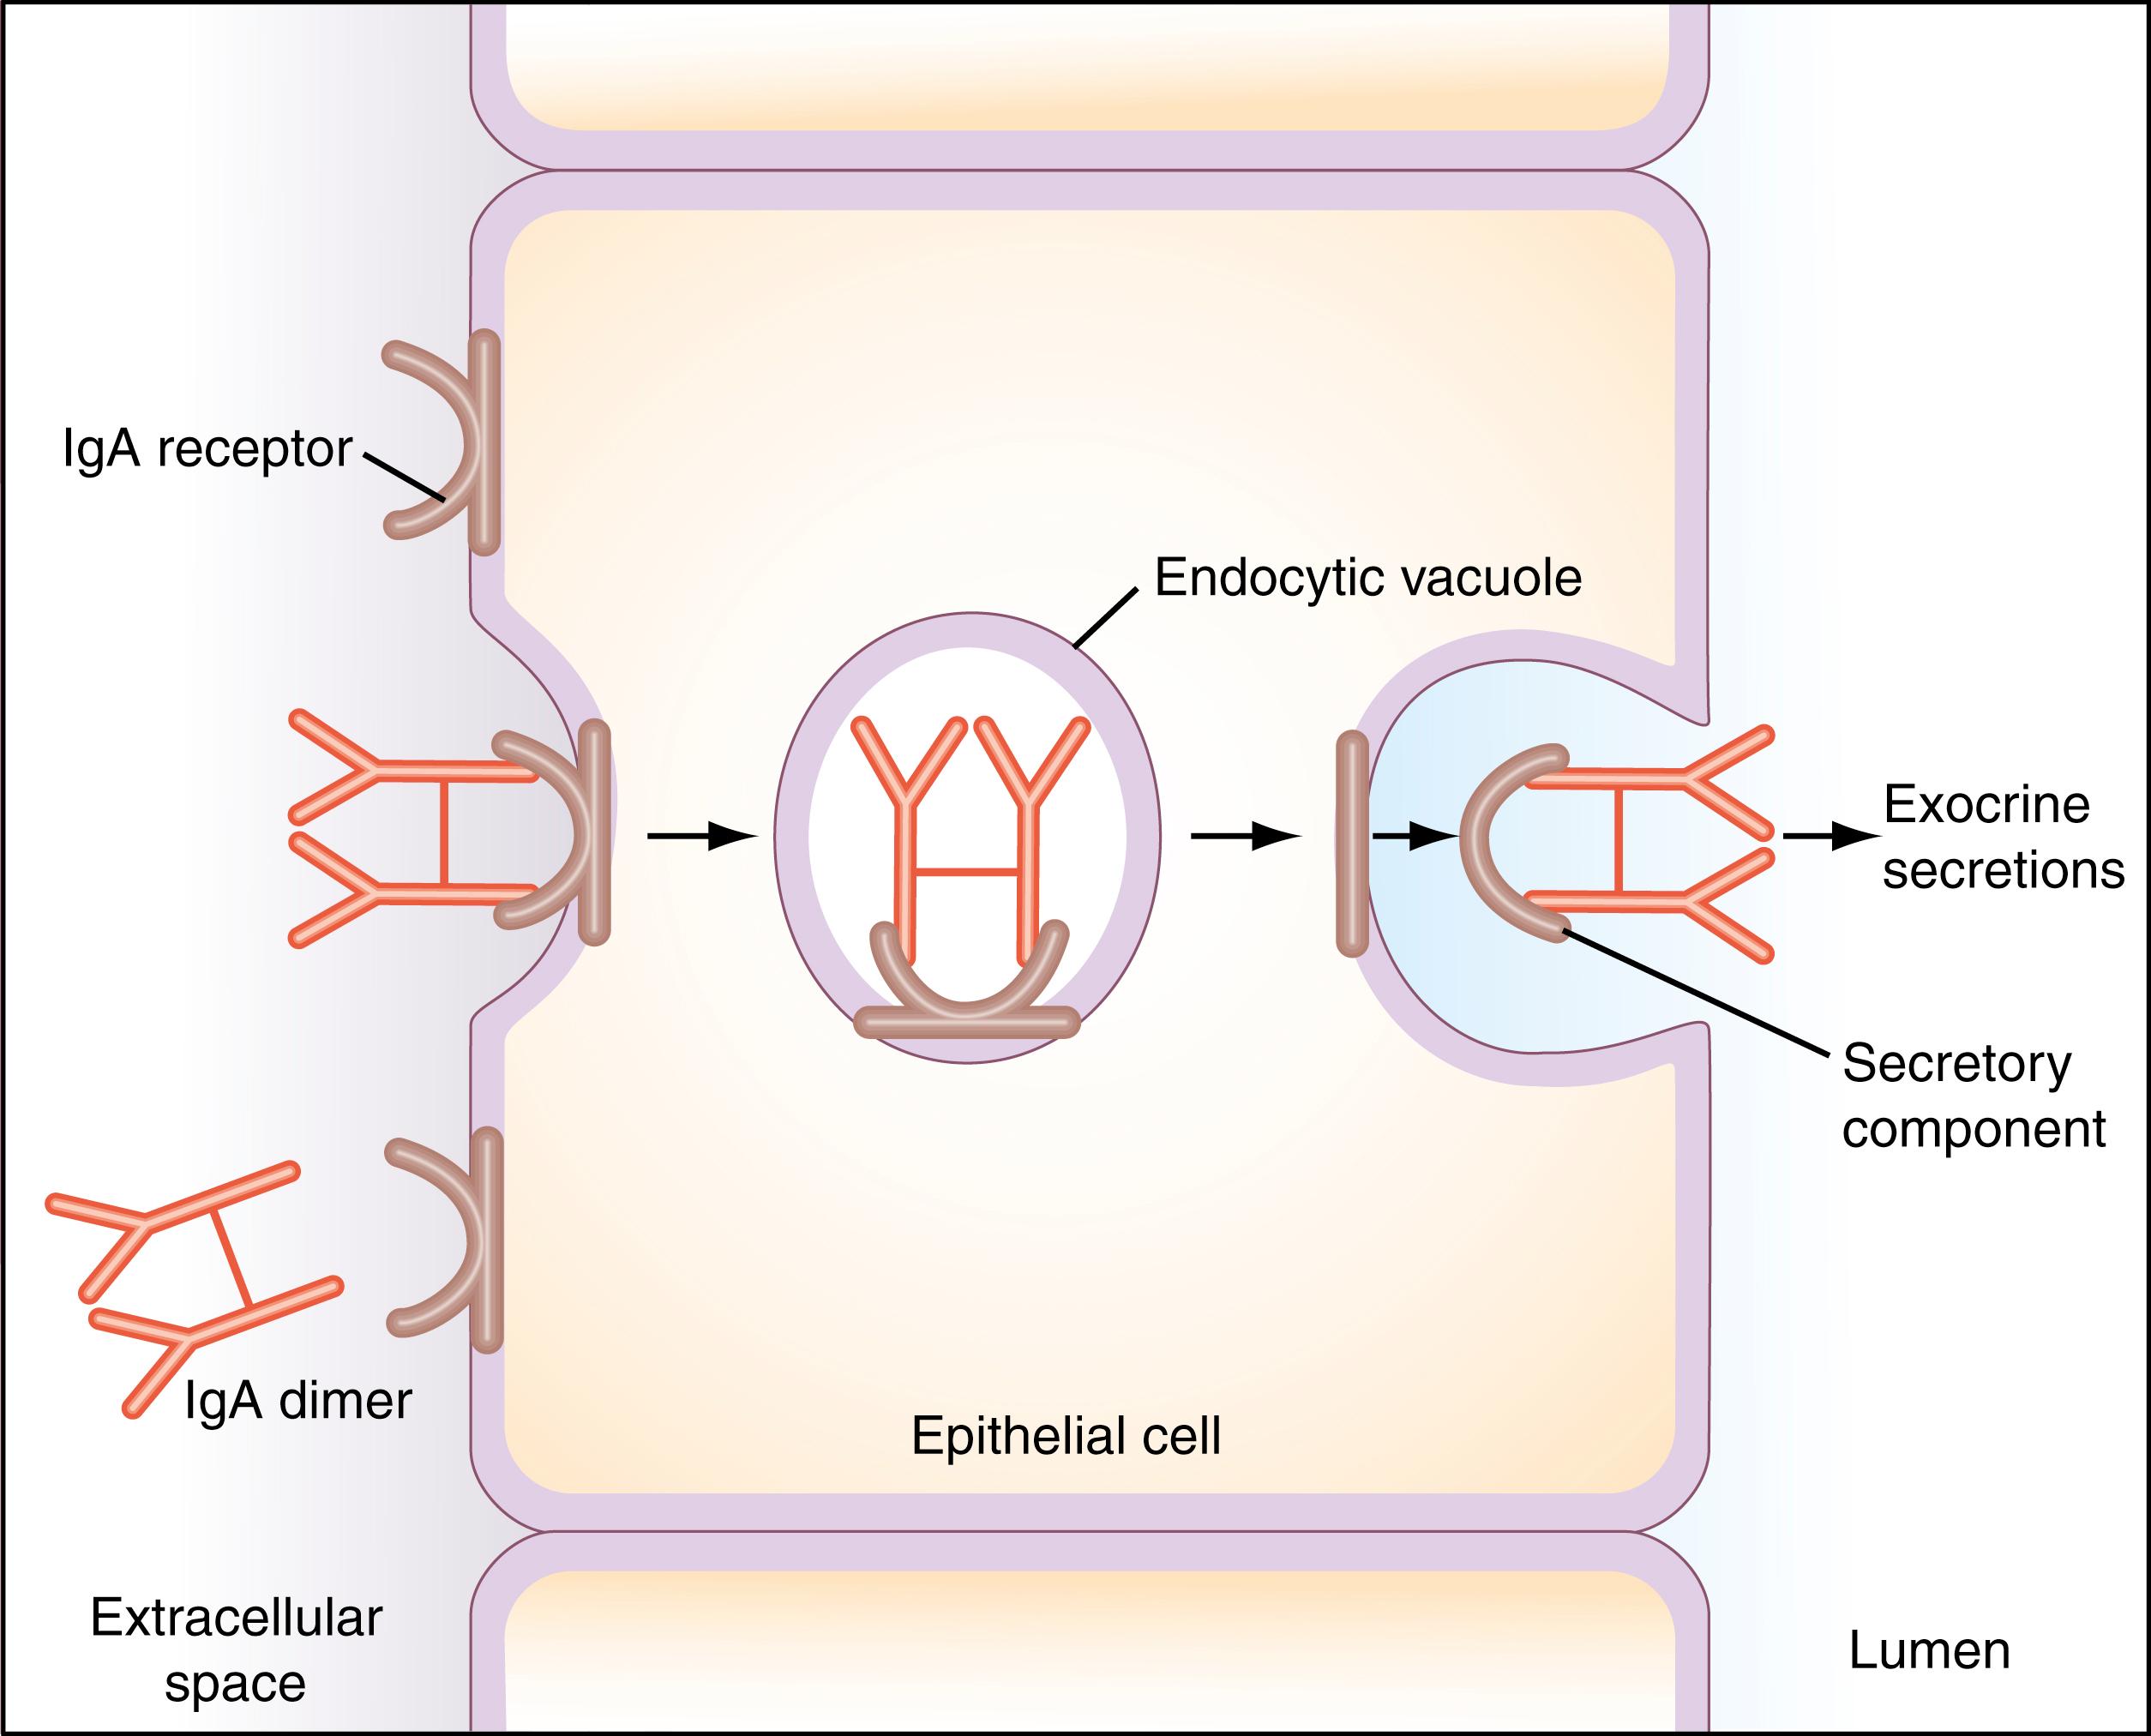 Figure 47.4, The mechanism by which the secretory component mediates the transport of a dimeric immunoglobulin (Ig) A molecule across an epithelial cell. The entire complex is transported from the extracellular fluid into the lumen of the epithelial tube. The secretory component is synthesized by the epithelial cell as a transmembrane glycoprotein and serves as a receptor on its basolateral surface for binding the IgA dimer. The receptor–IgA complex enters the cell in an endocytotic vesicle, which crosses the cell and is exocytosed at the apical surface. Cleavage of the receptor frees the dimer IgA for discharge at the exterior surface (lumen side). The portion of the receptor that remains attached to the IgA dimer is called the secretory component . This transport mechanism is responsible for depositing IgA in various exocrine secretions (e.g., saliva, milk, bile, tears, sweat), as well as in the mucous layer that protects the inner lining of the nasopharyngeal passages, intestine, and genitourinary tract.